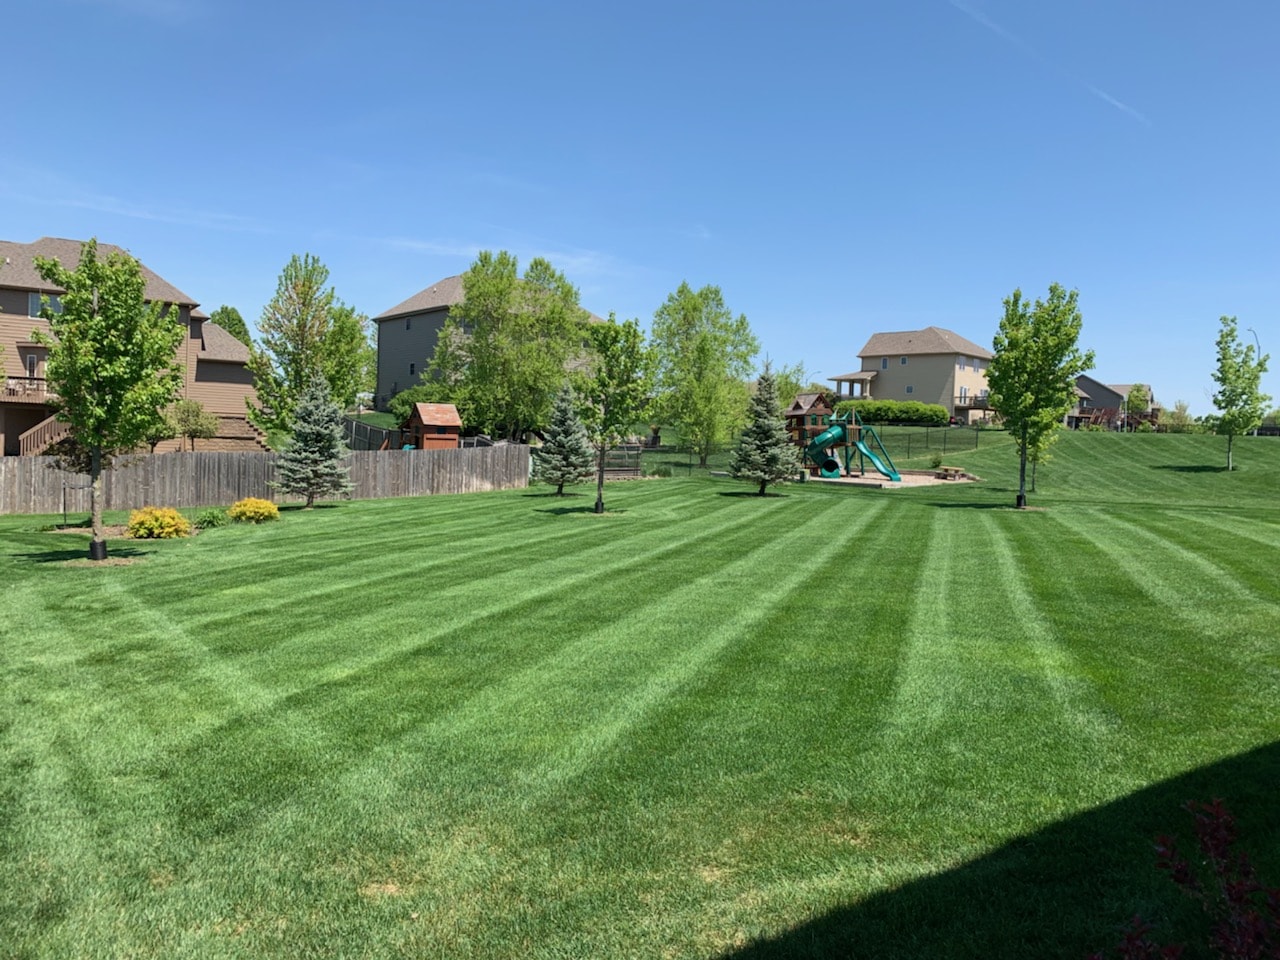 Grass Cutting and Yard Care by Norwalk Seasonal - Des Moines, Iowa